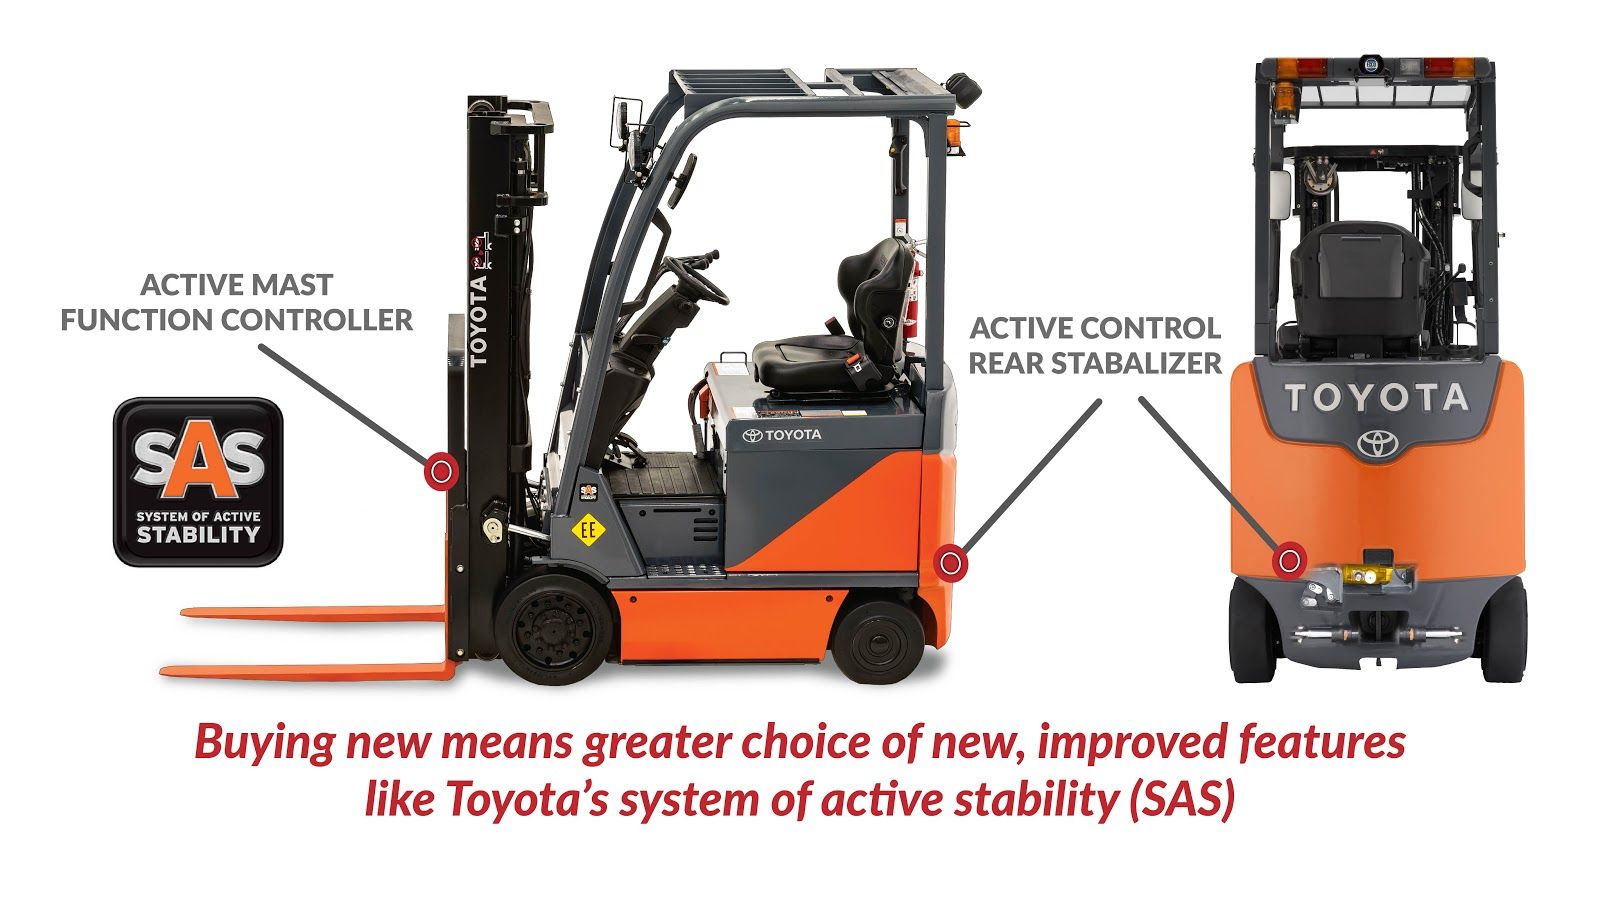 Buying new means greater choice of new, improved features like Toyota's system of active stability (SAS).